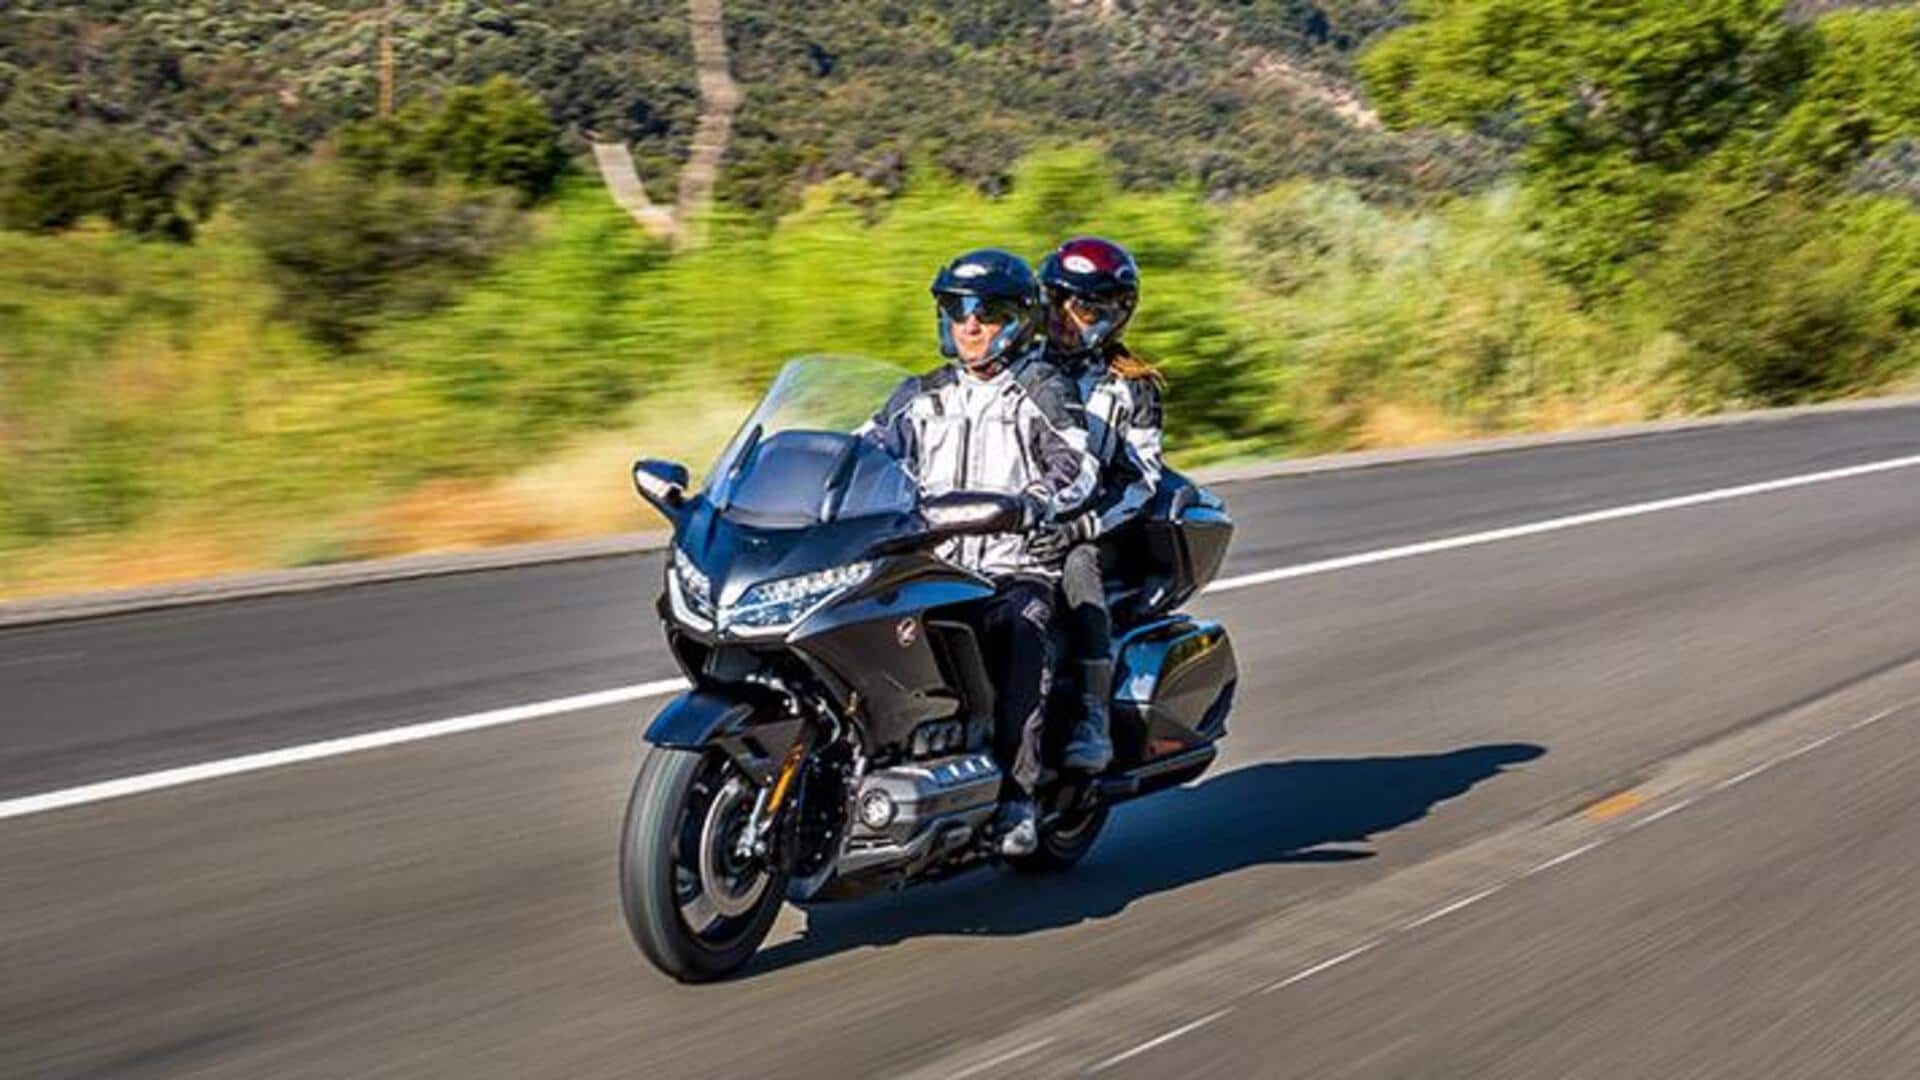 Honda Gold Wing Tour launched at Rs. 39L, bookings open